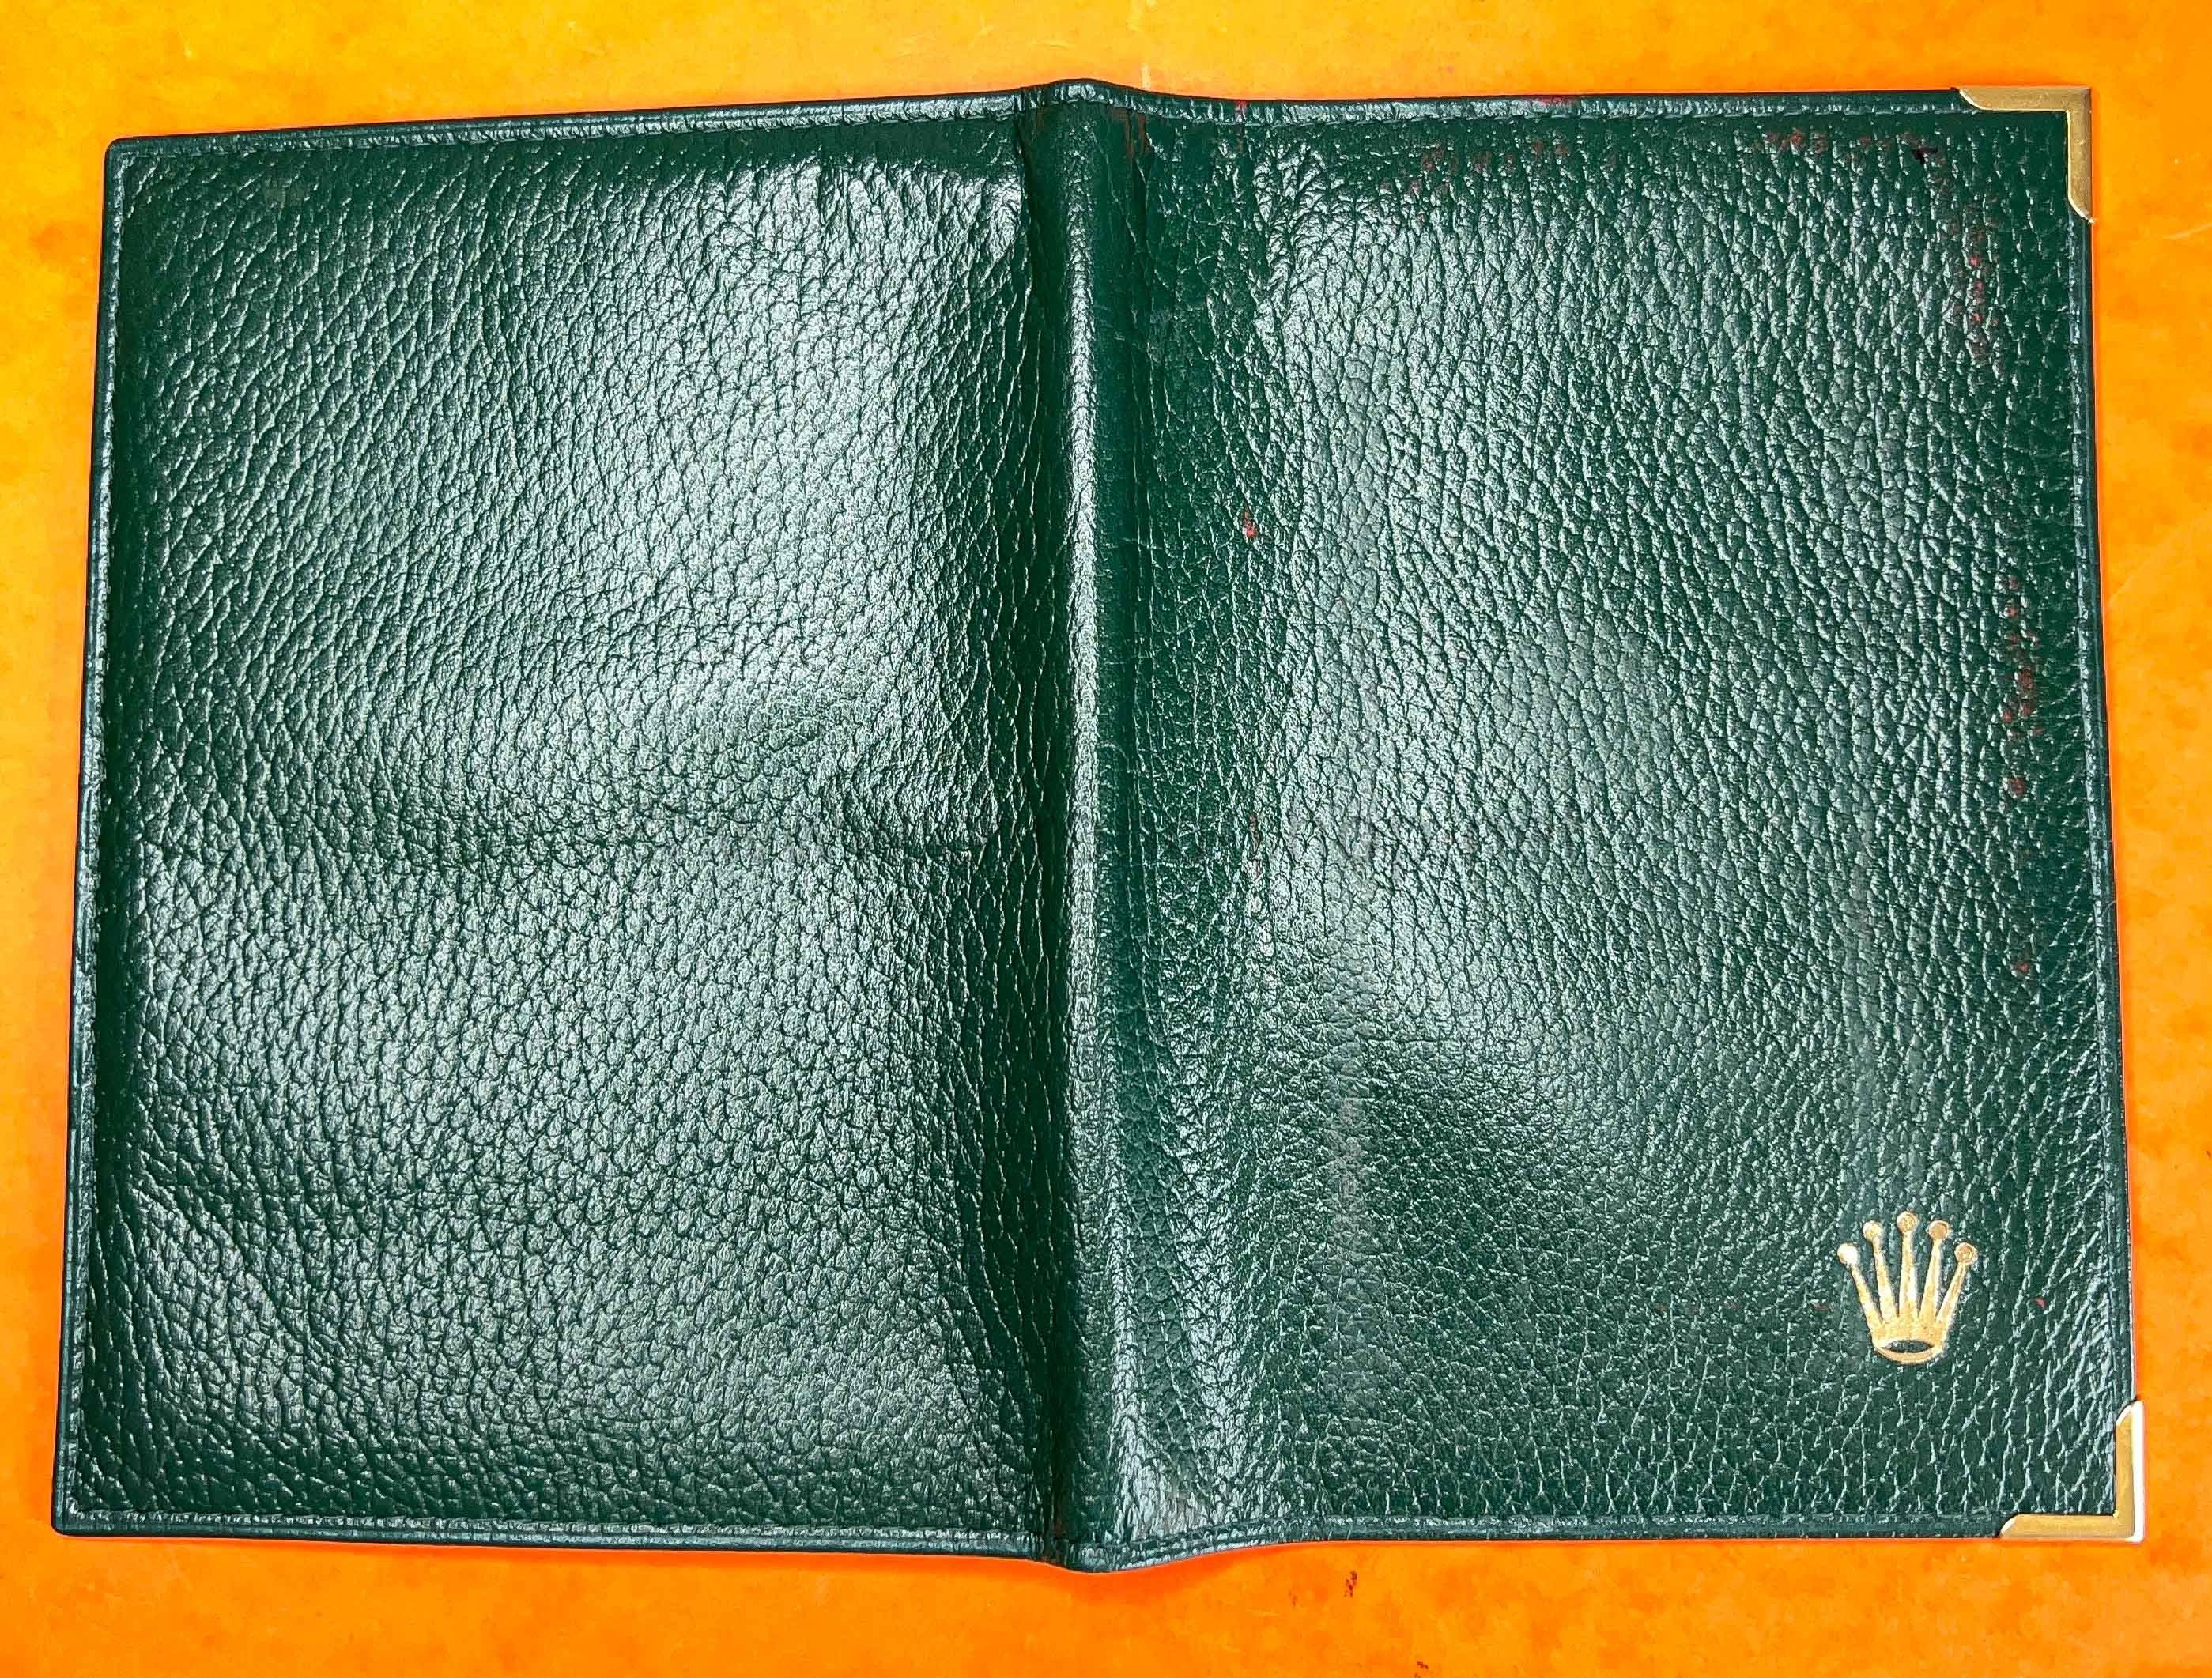 ROLEX Rare Vintage Green Grain Leather Large Billfold Wallet AUTHENTIC ref 68.08.55